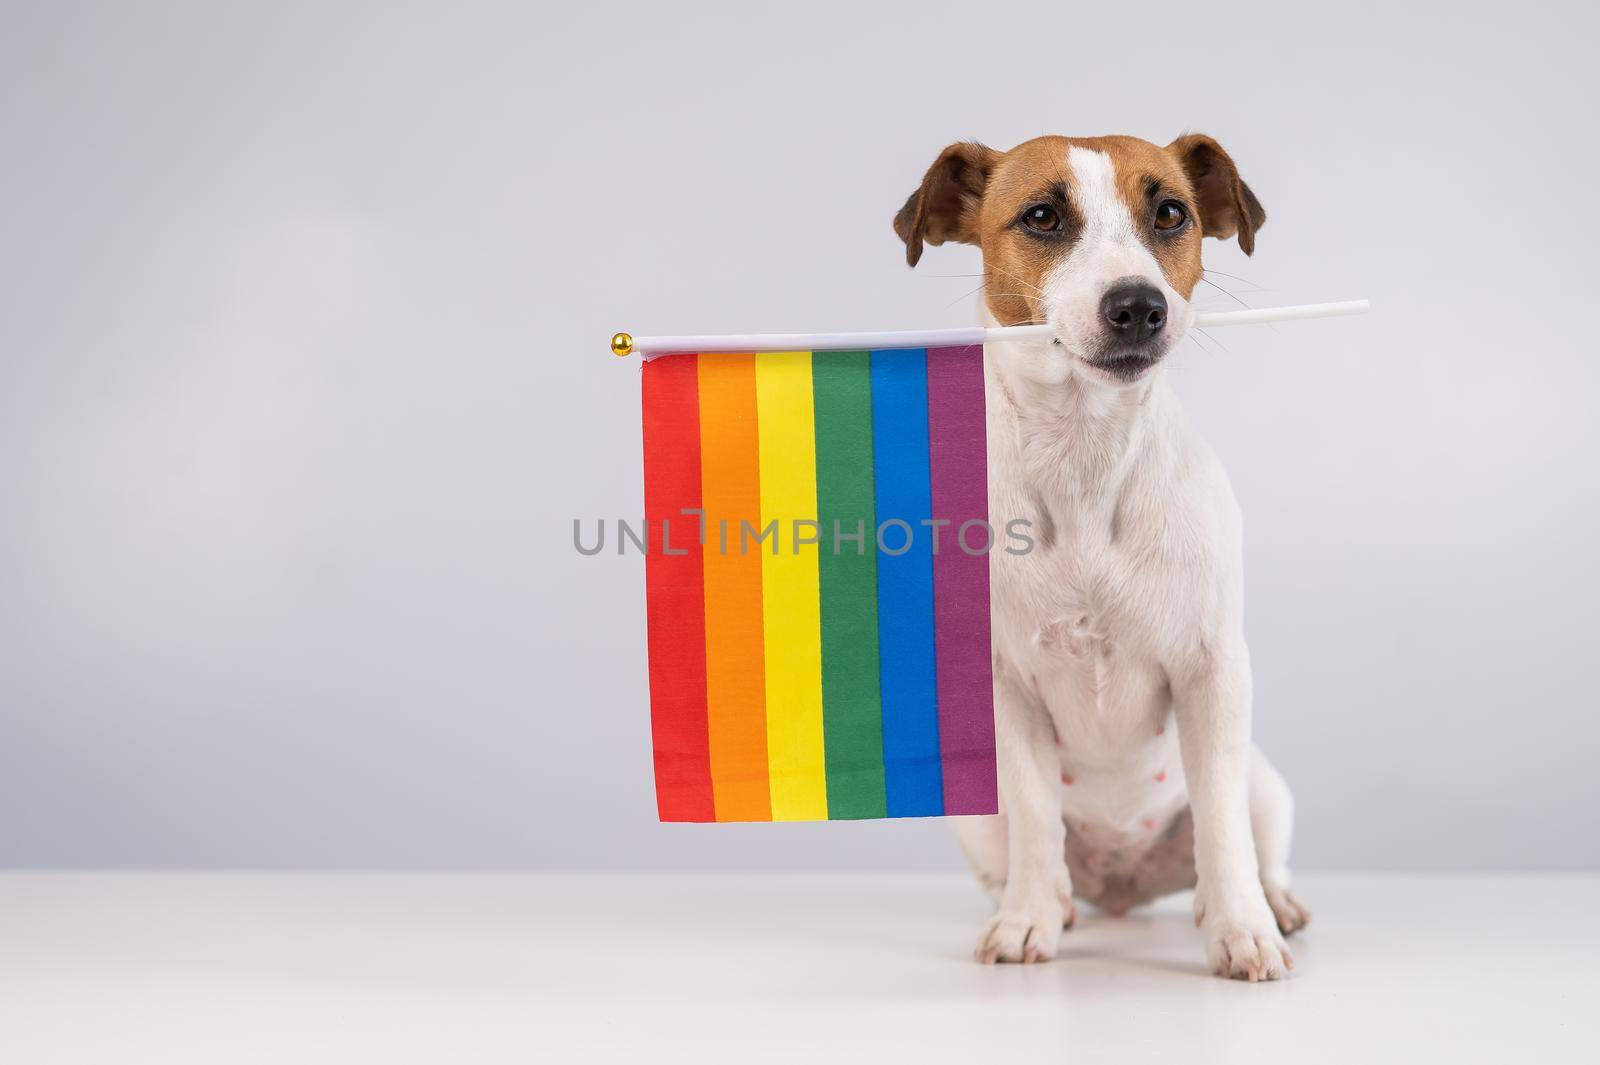 Jack russell terrier dog holding a rainbow flag in his mouth on a white background. Copy space